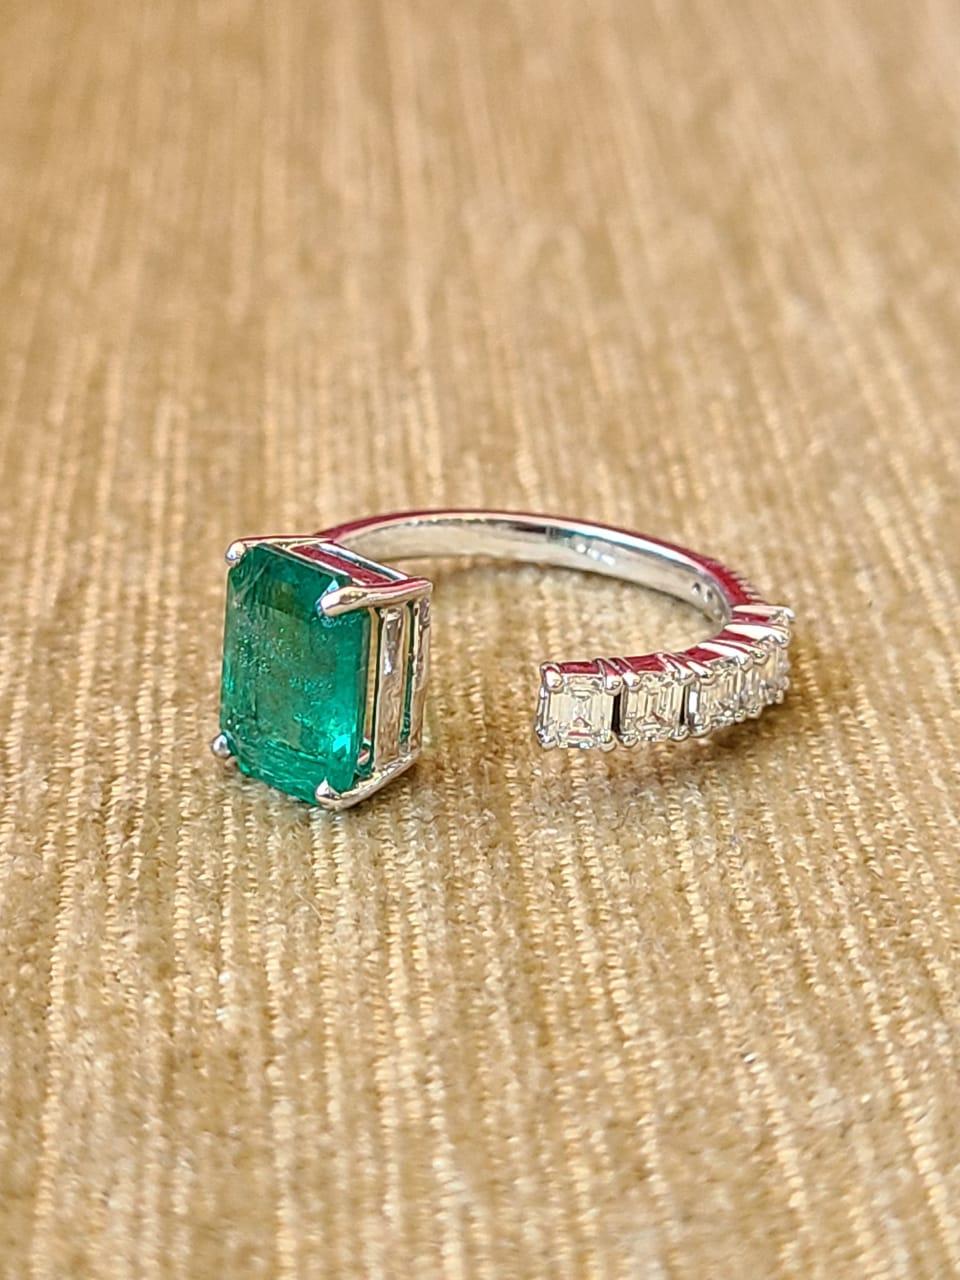 A very gorgeous and dainty Emerald Engagement/ Cocktail Ring set in 18K Gold & Diamonds. The weight of the Emerald is 2.36 carats. The Emerald is of Zambian origin, and is completely natural, without any treatment. The combined weight of the